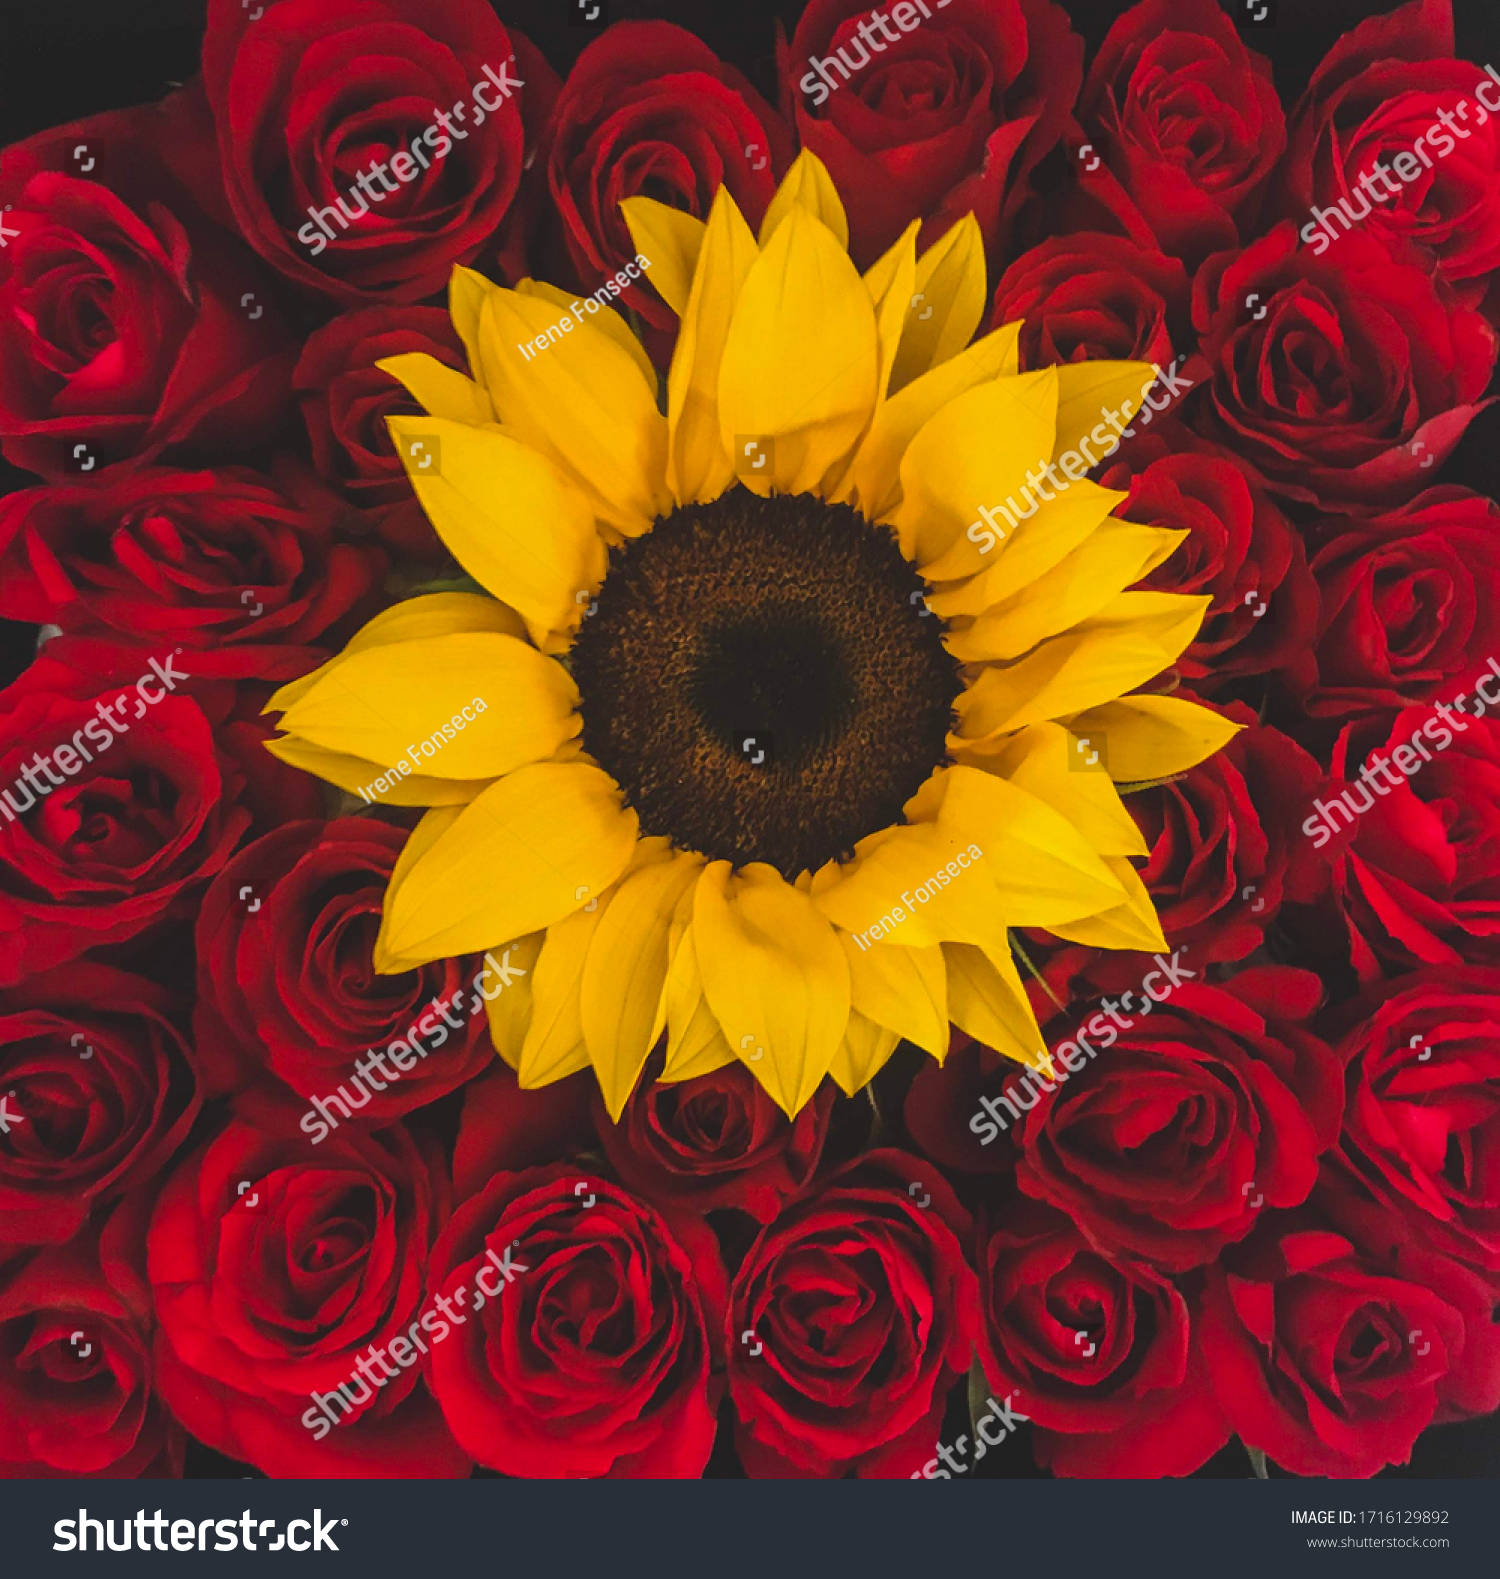 Sunflower and Roses Wallpapers  Top Free Sunflower and Roses Backgrounds   WallpaperAccess